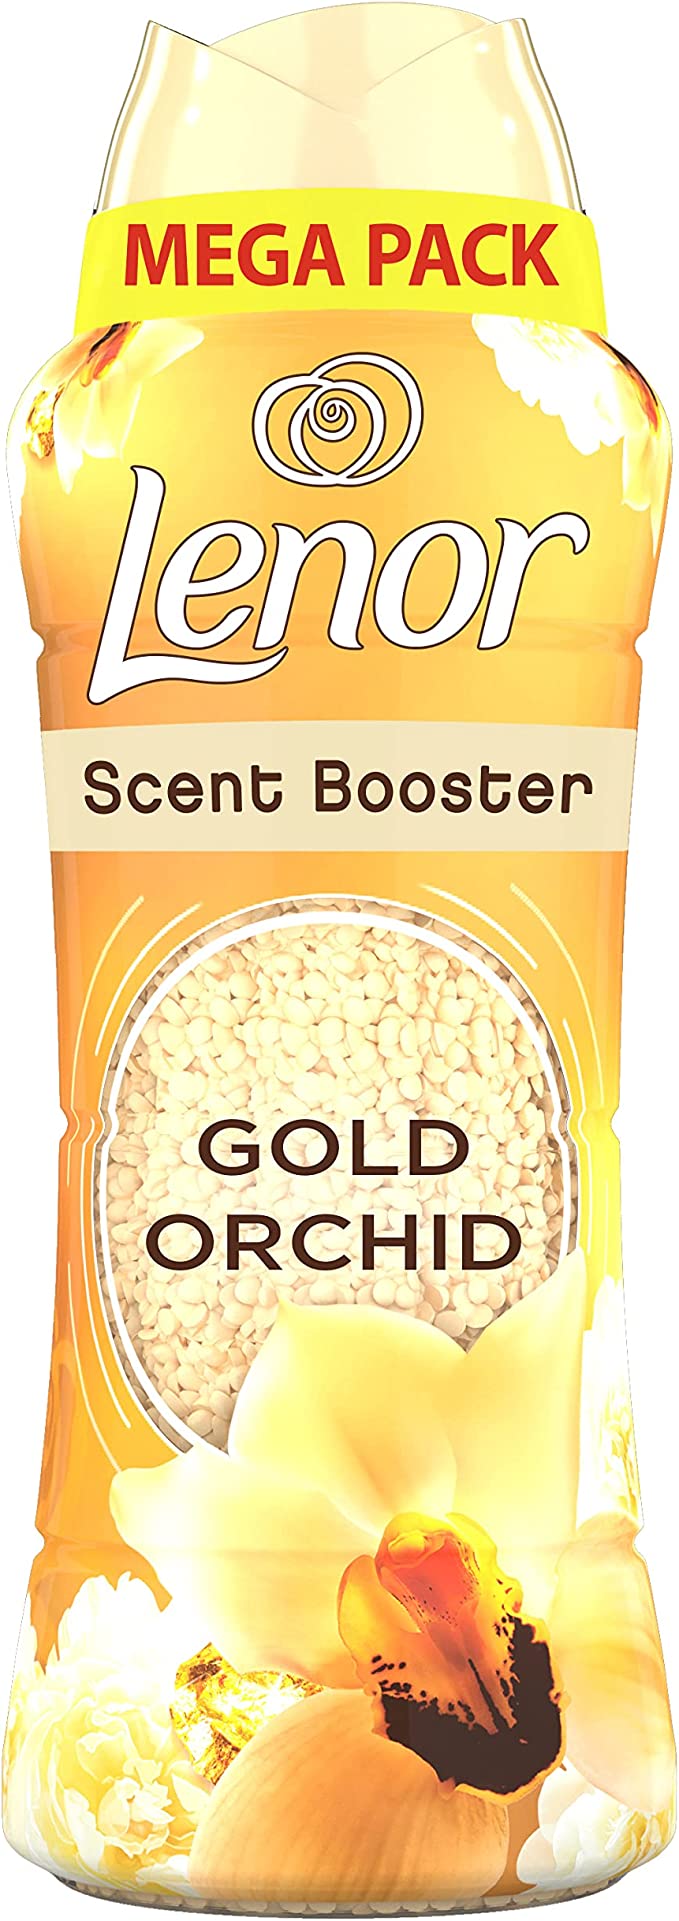 Lenor Scent Booster Gold Orchid 570 Gm